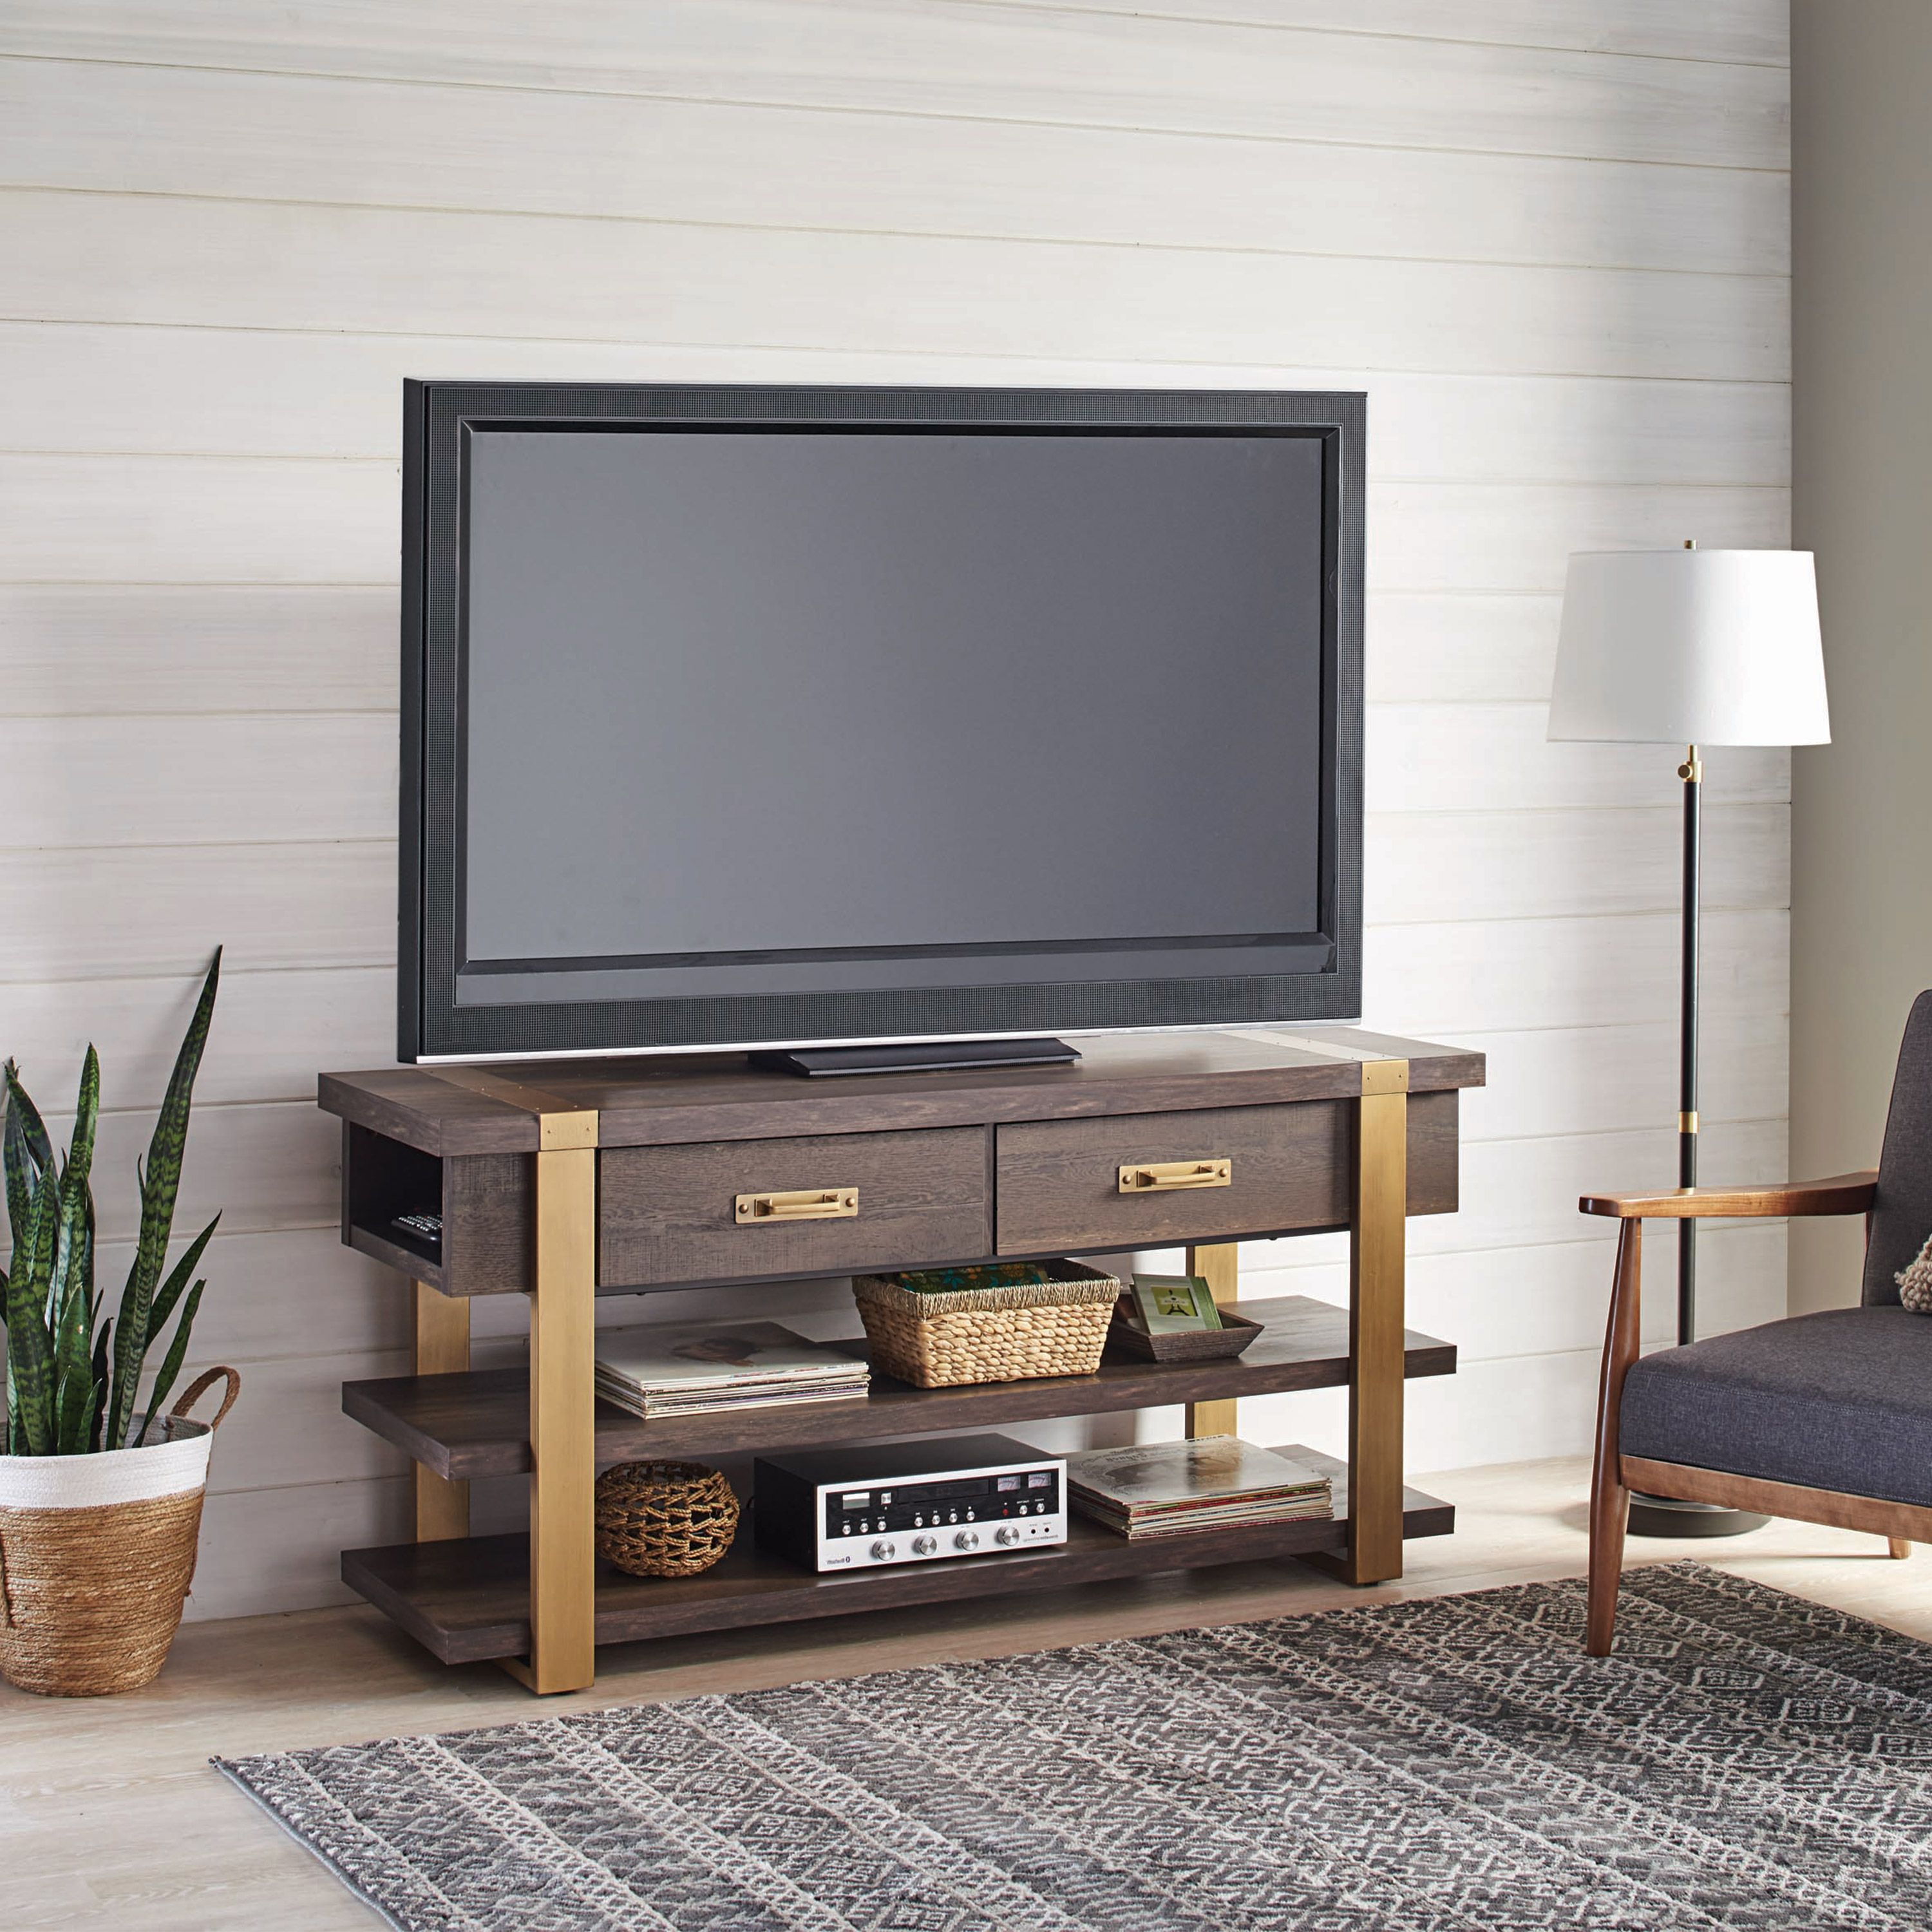 2018 Modern Lcd Tv Cases With Regard To Better Homes & Gardens Lana Modern 3 In 1 Tv Stand, For Tvs Up To (Photo 2 of 20)